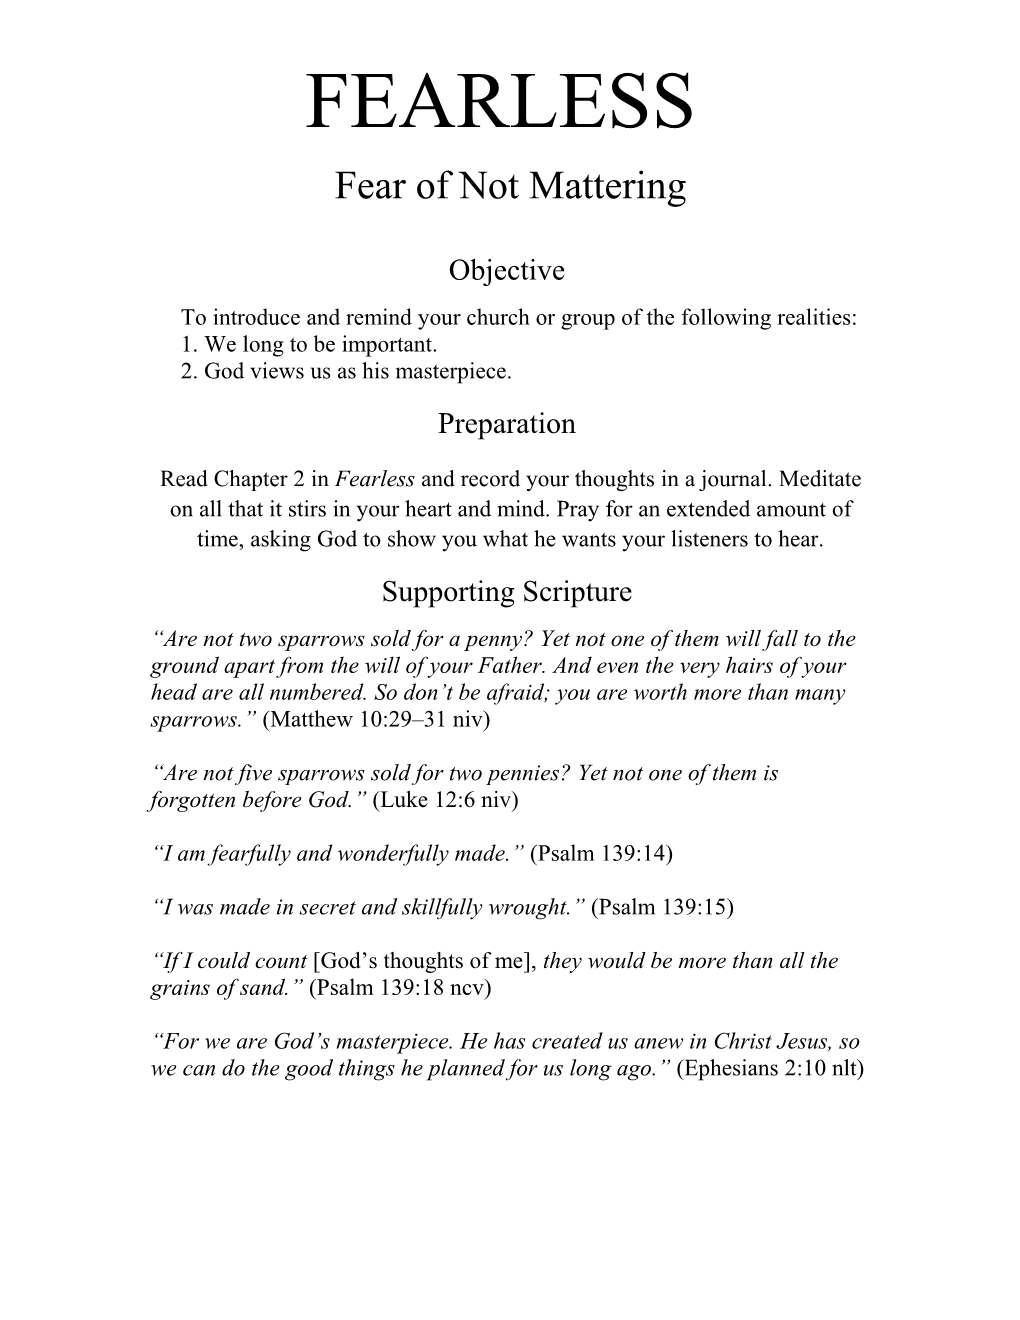 To Introduce and Remind Your Church Or Group of the Following Realities